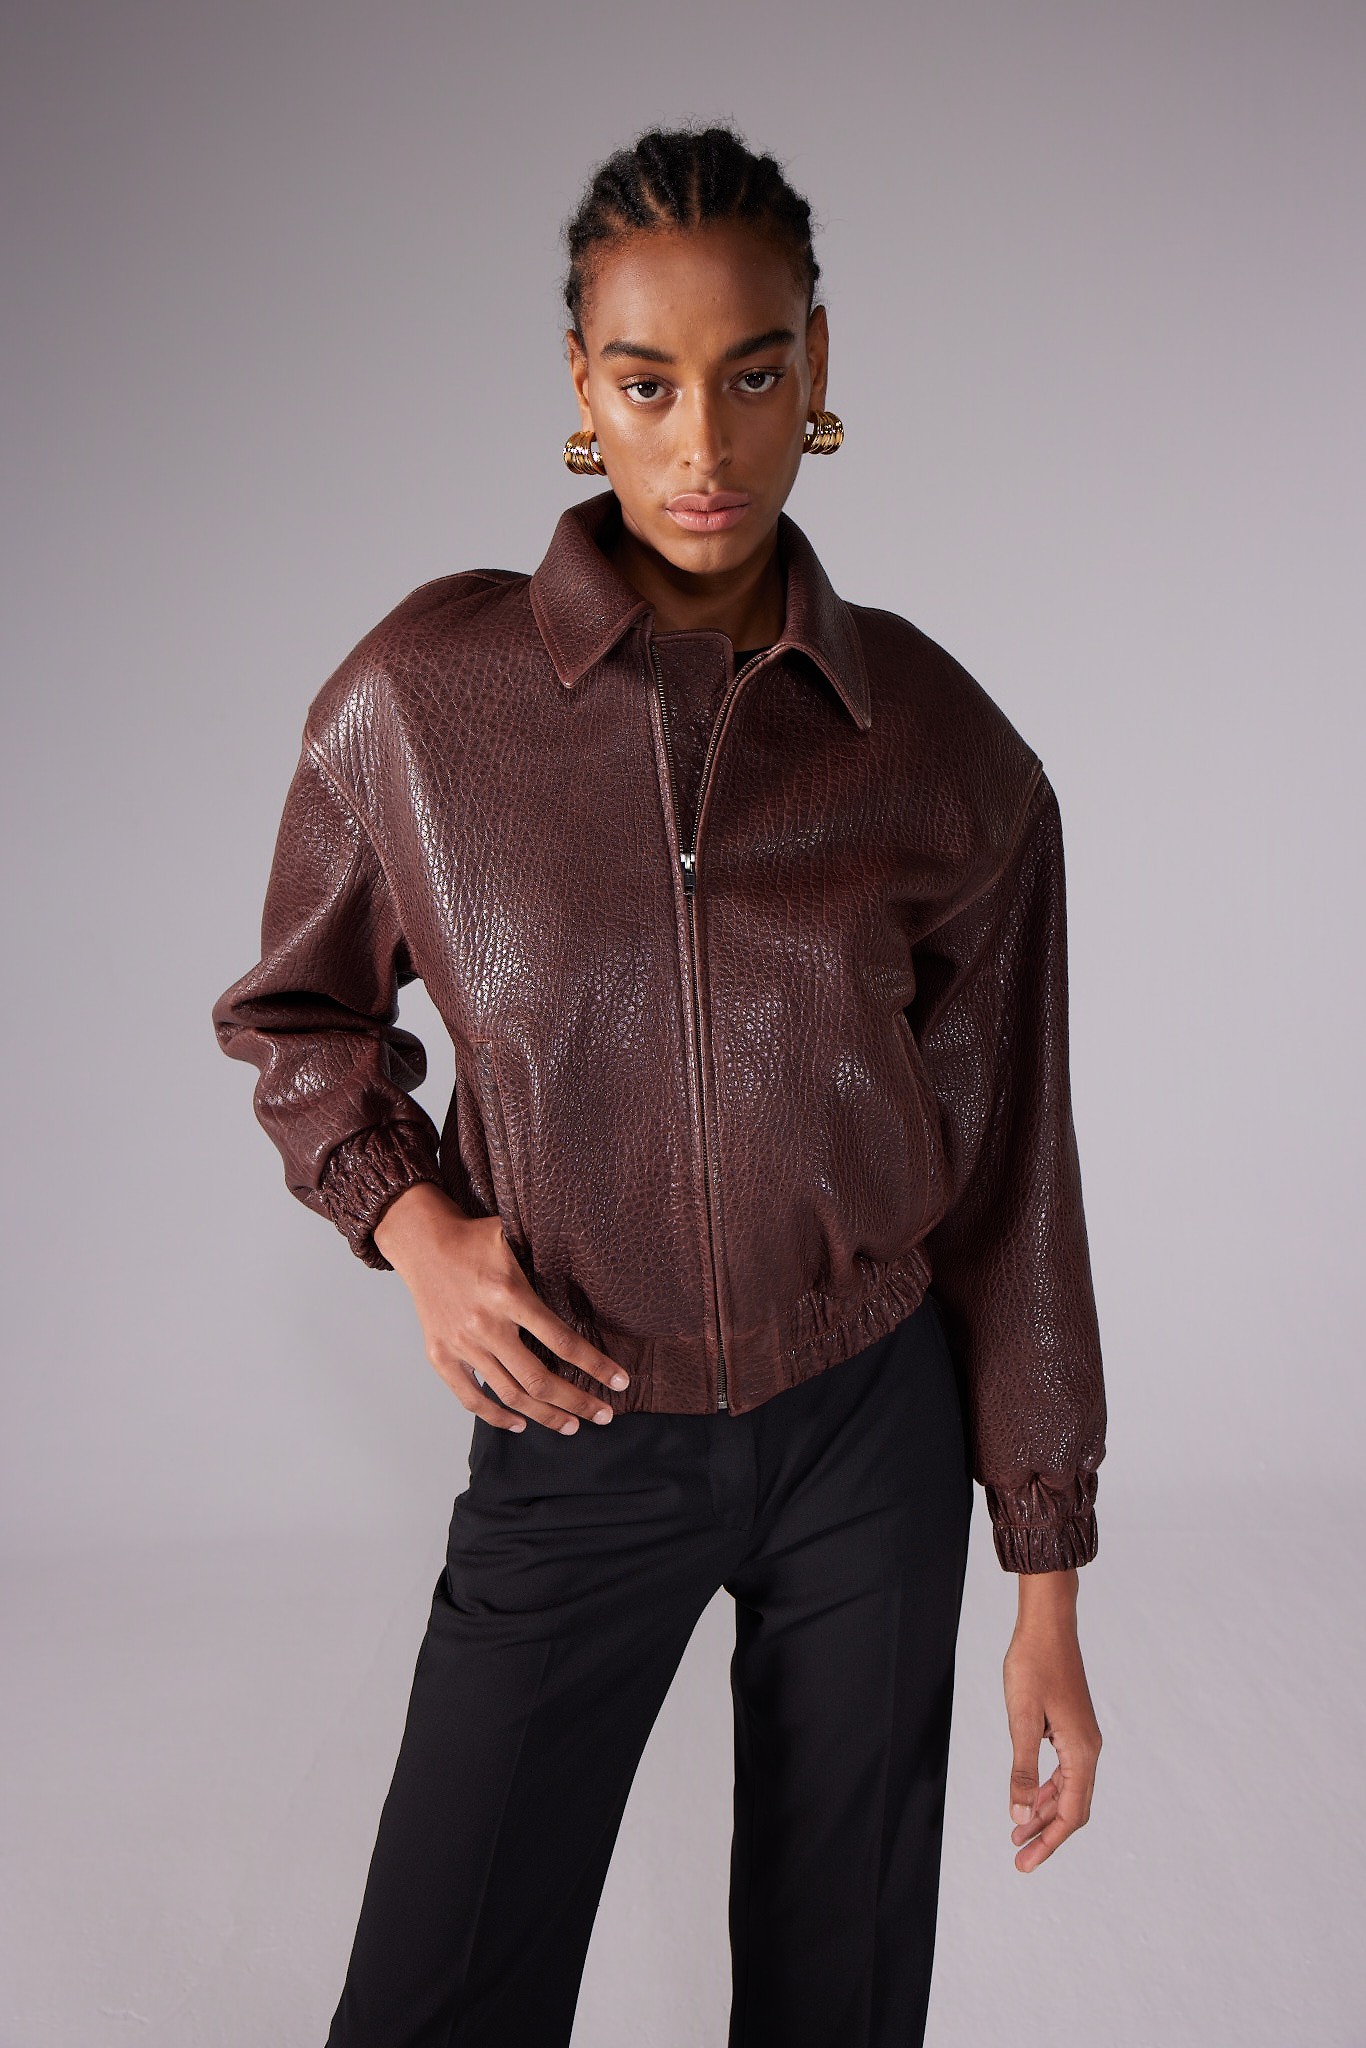 WHISKEY COLLEGE JACKET WITH A RUBBER WAIST